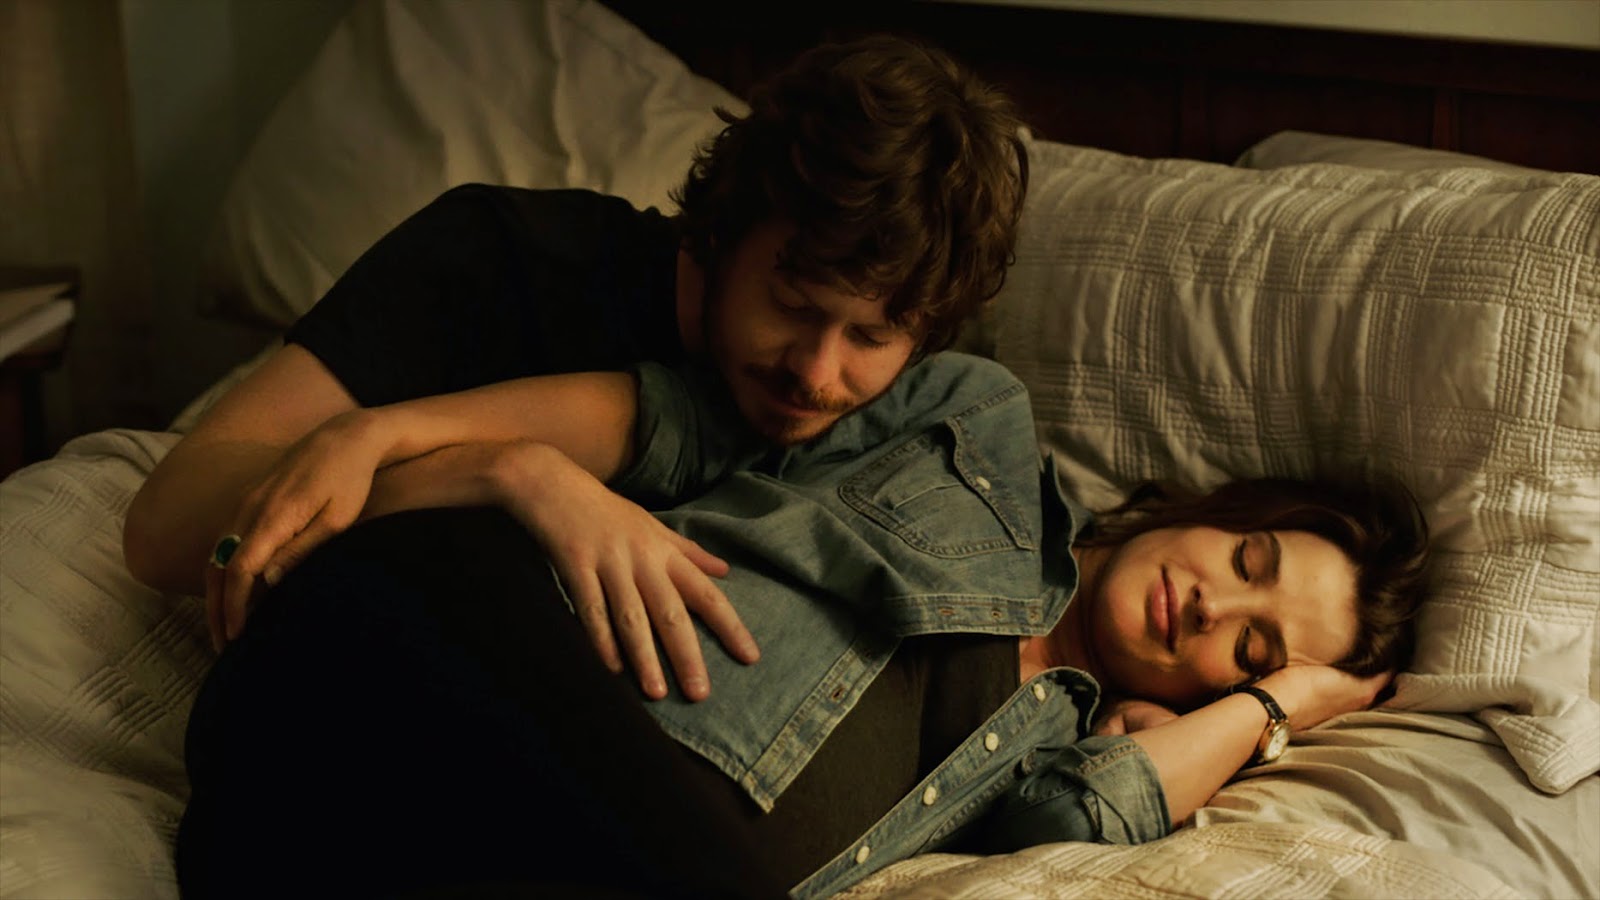 MOVIES: Unexpected - Review - Sundance 2015